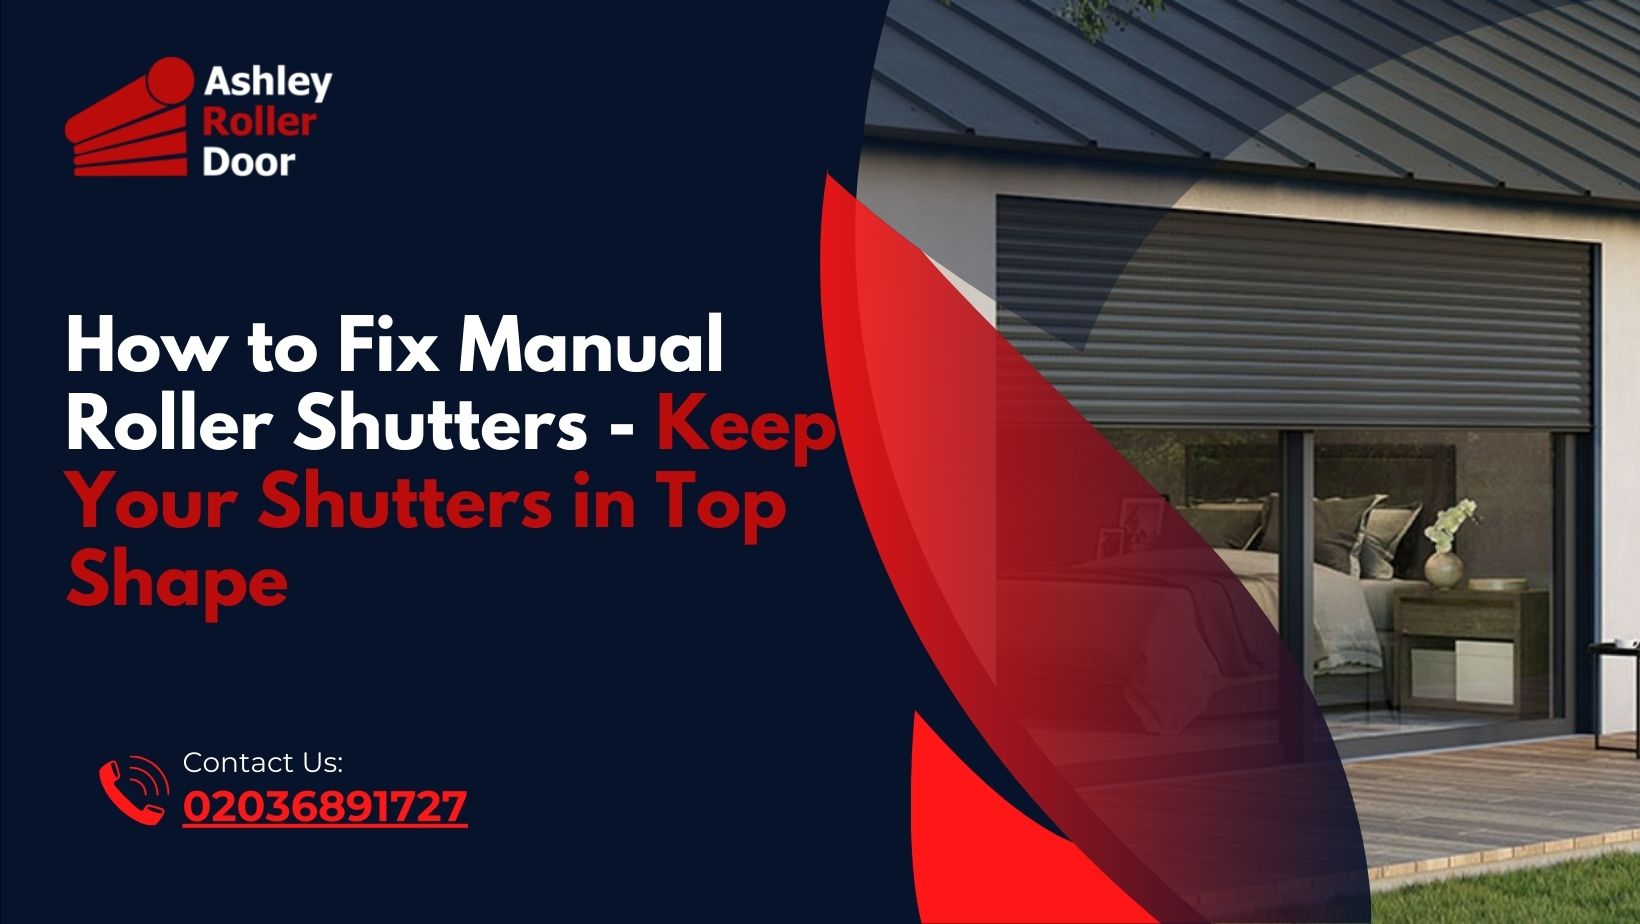 How to Fix Manual Roller Shutters